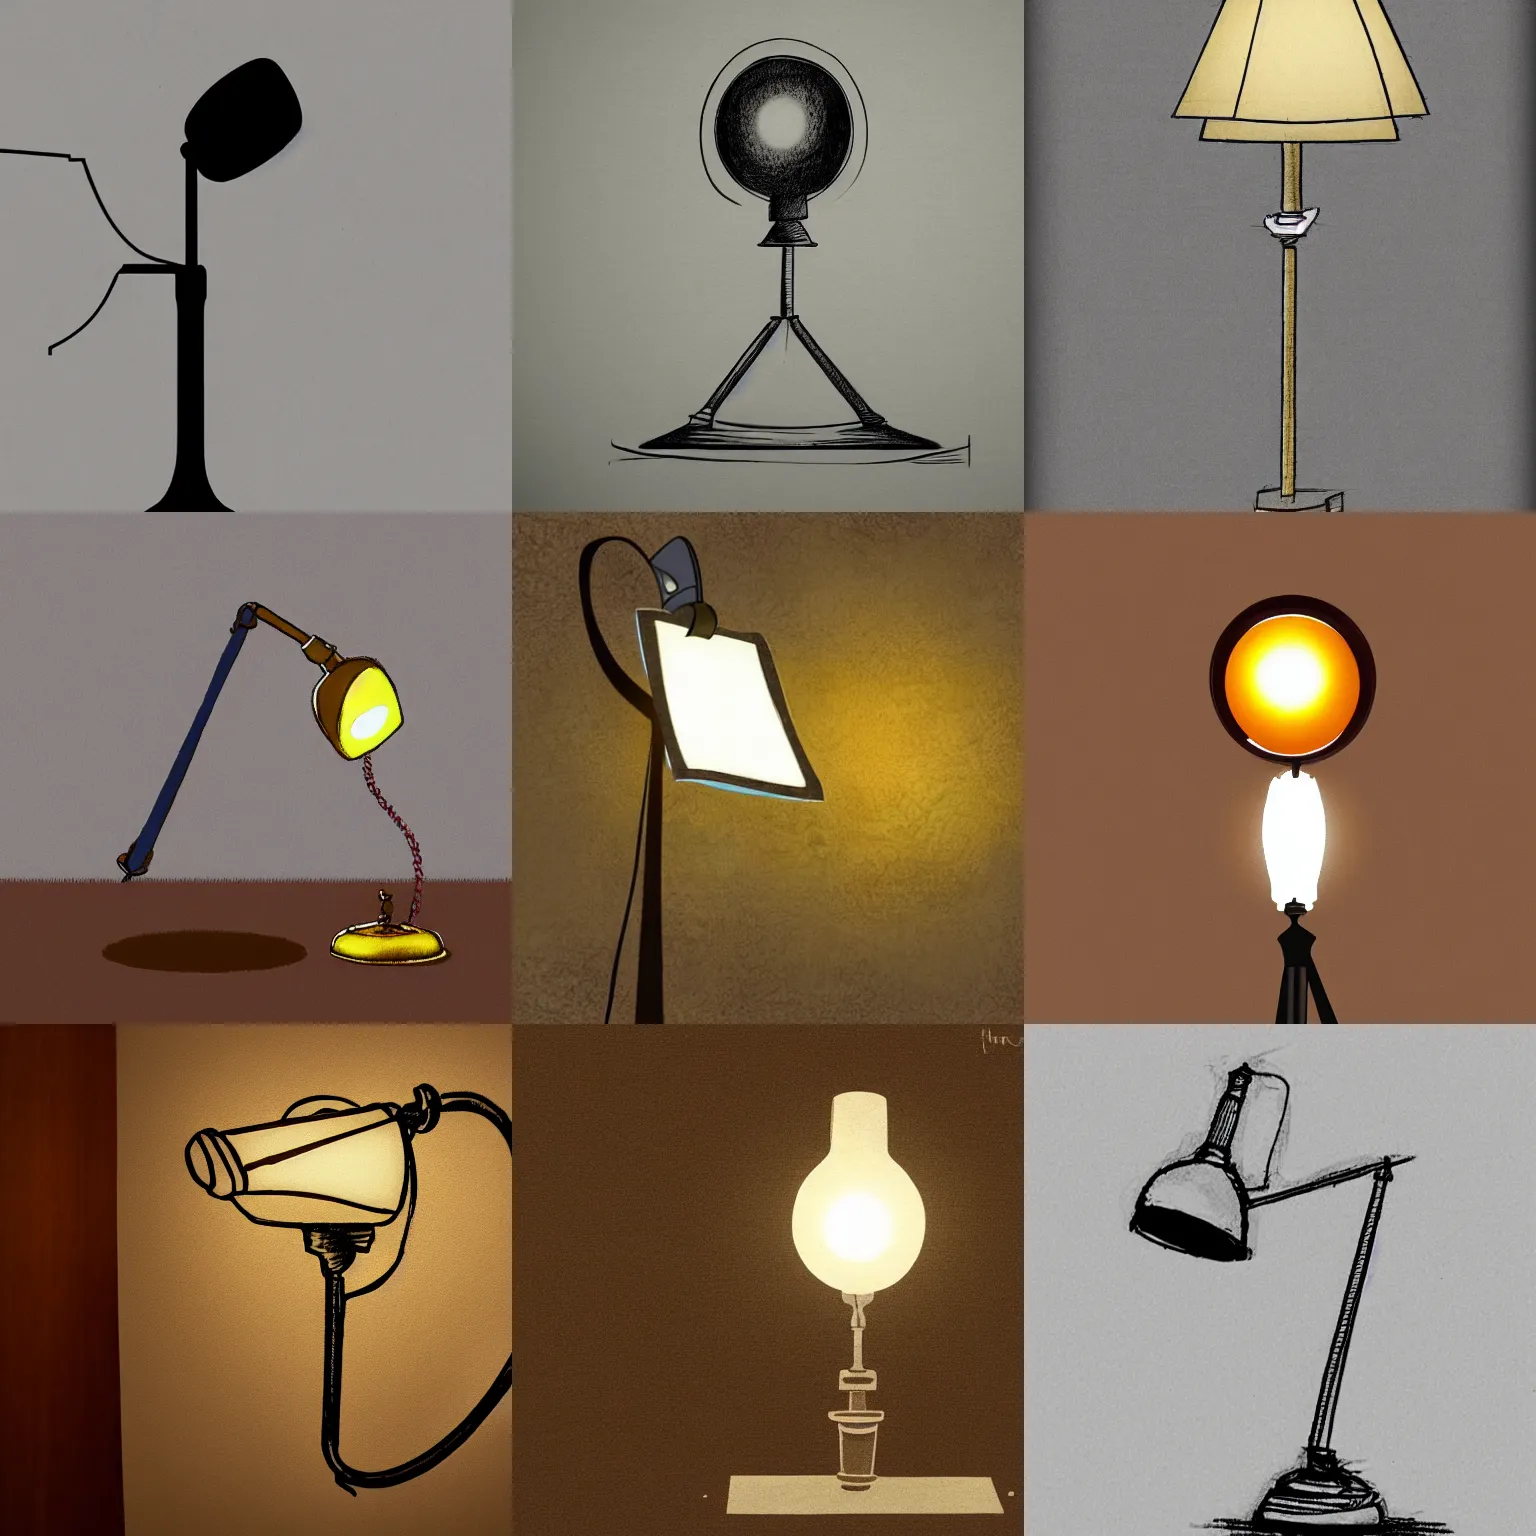 Prompt: pixar lamp standing trial for murdering the letter i, detailed court sketch